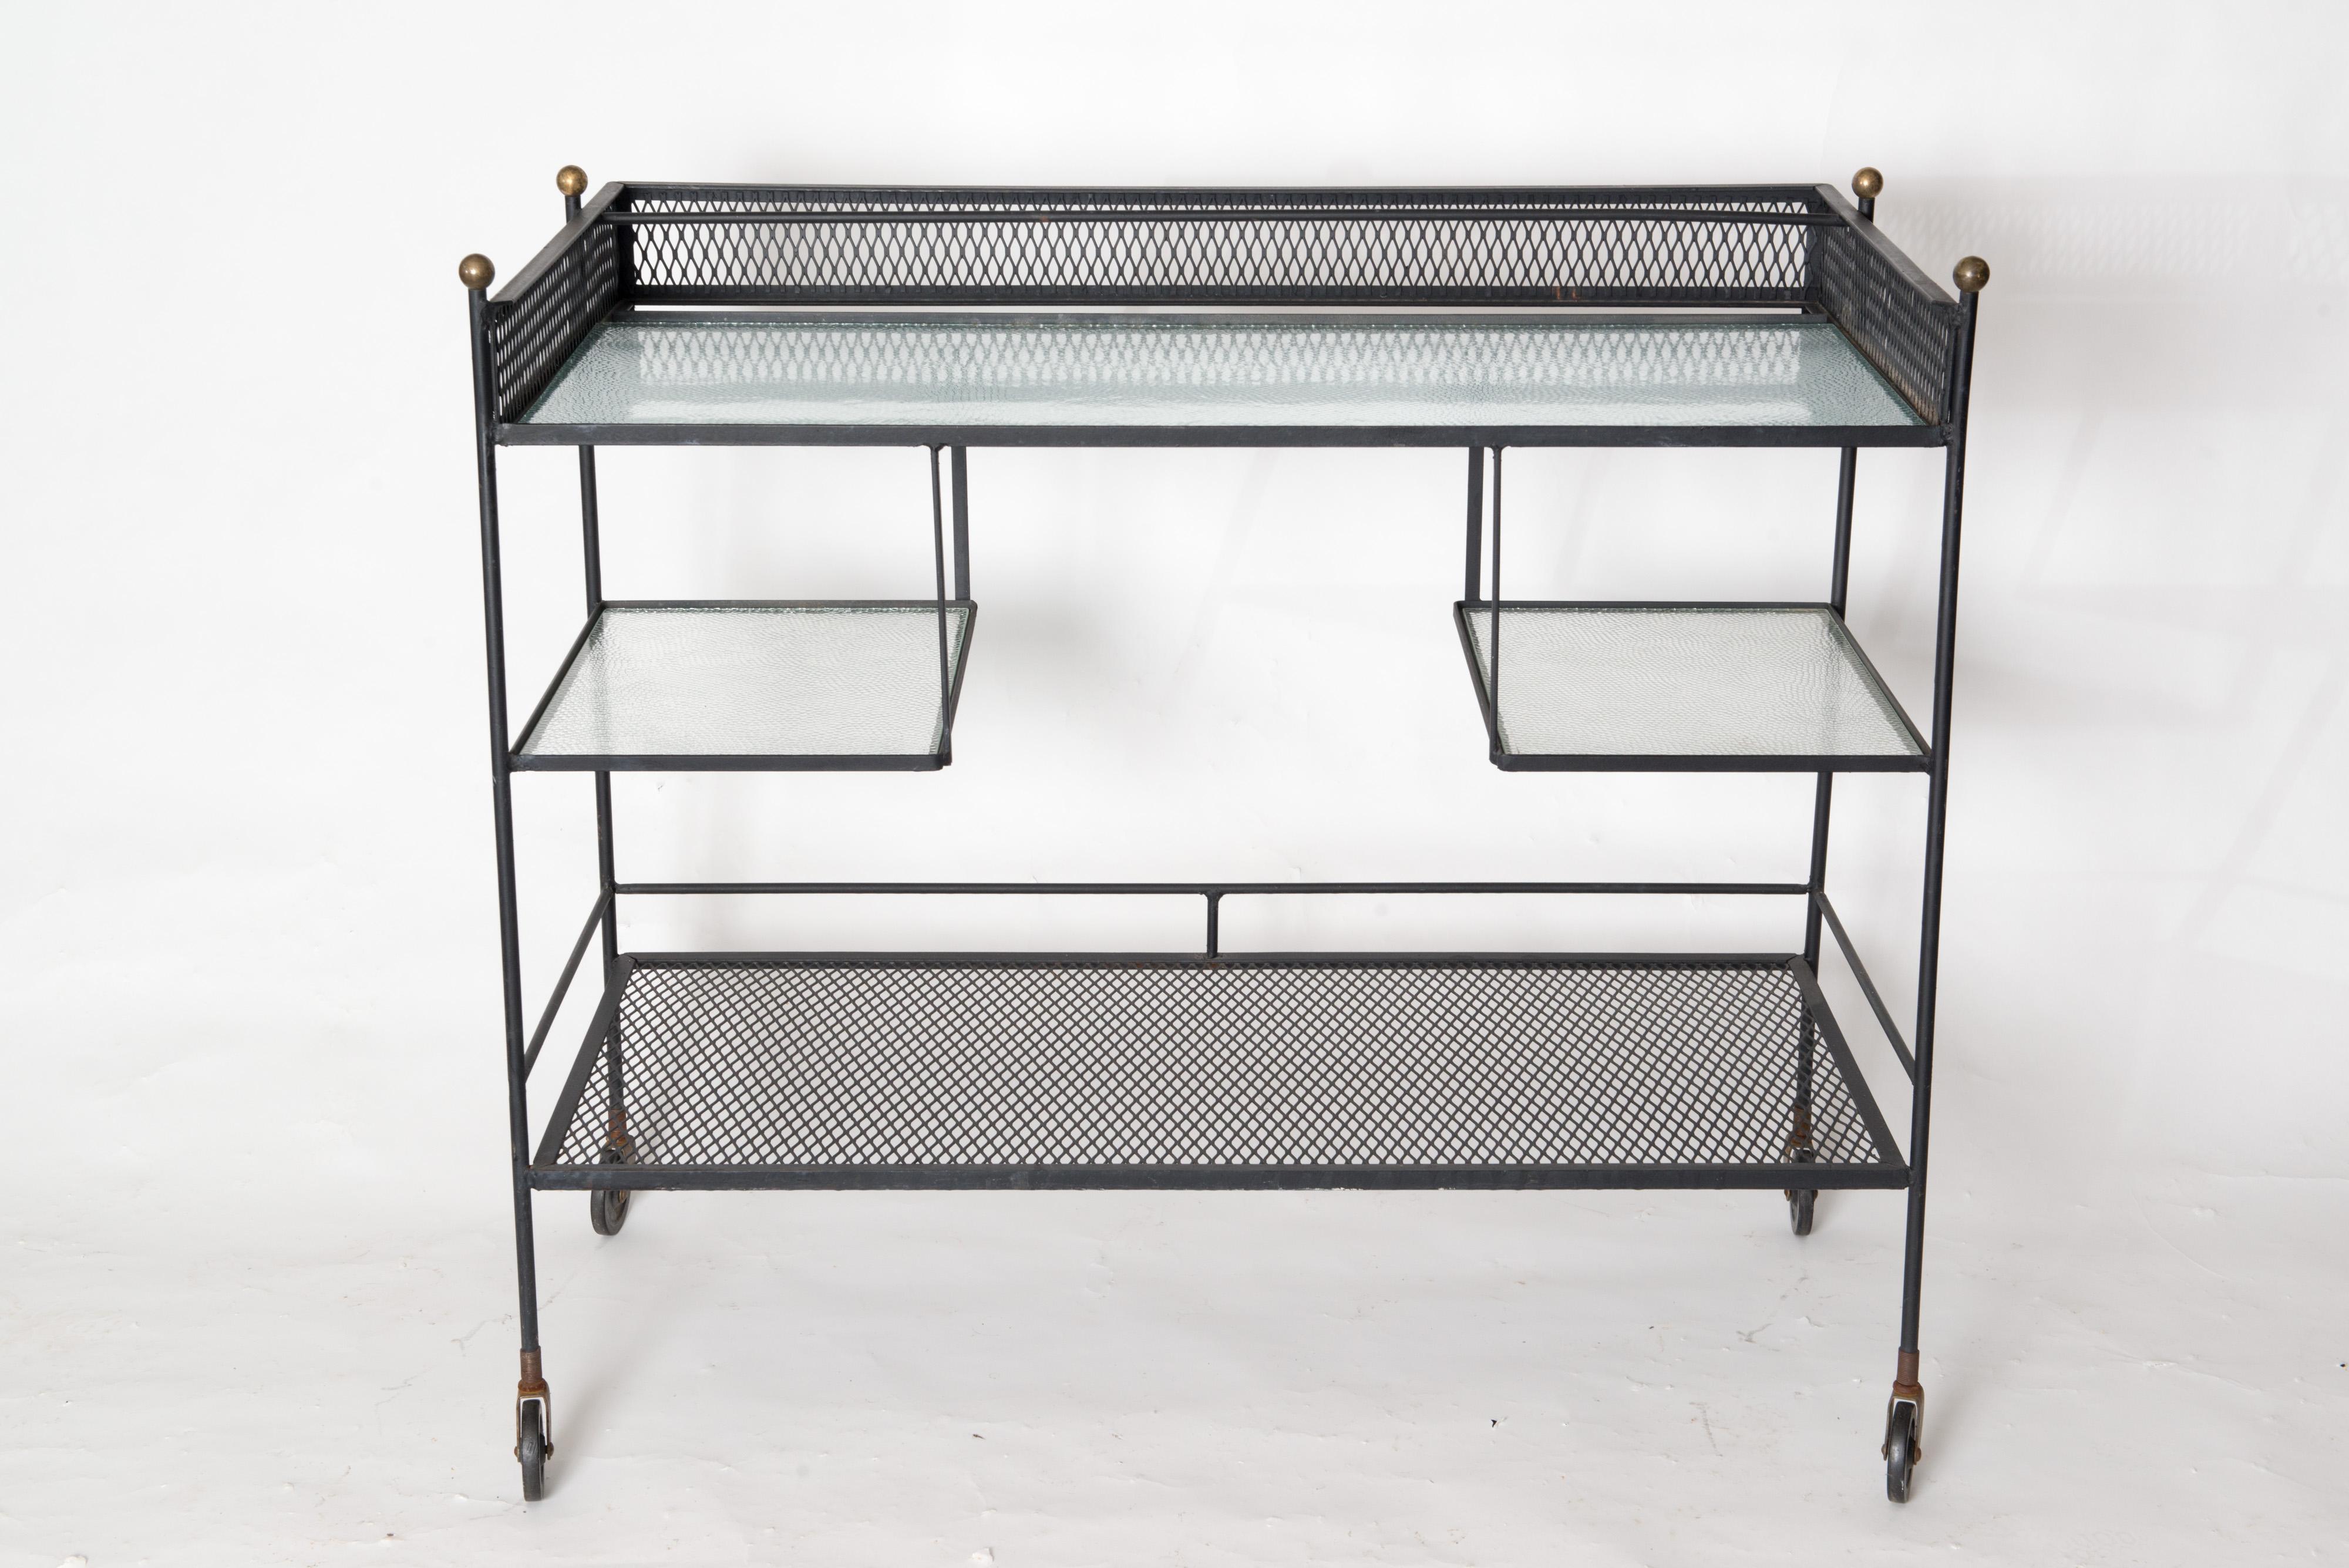 This is a Mid-Century Modern three level wrought iron and glass rolling serving cart or bar cart with brass finials. The lowest shelf is metal mesh. The two middle shelves are glass. The top surface is glass. This cart is a very useful and fits in